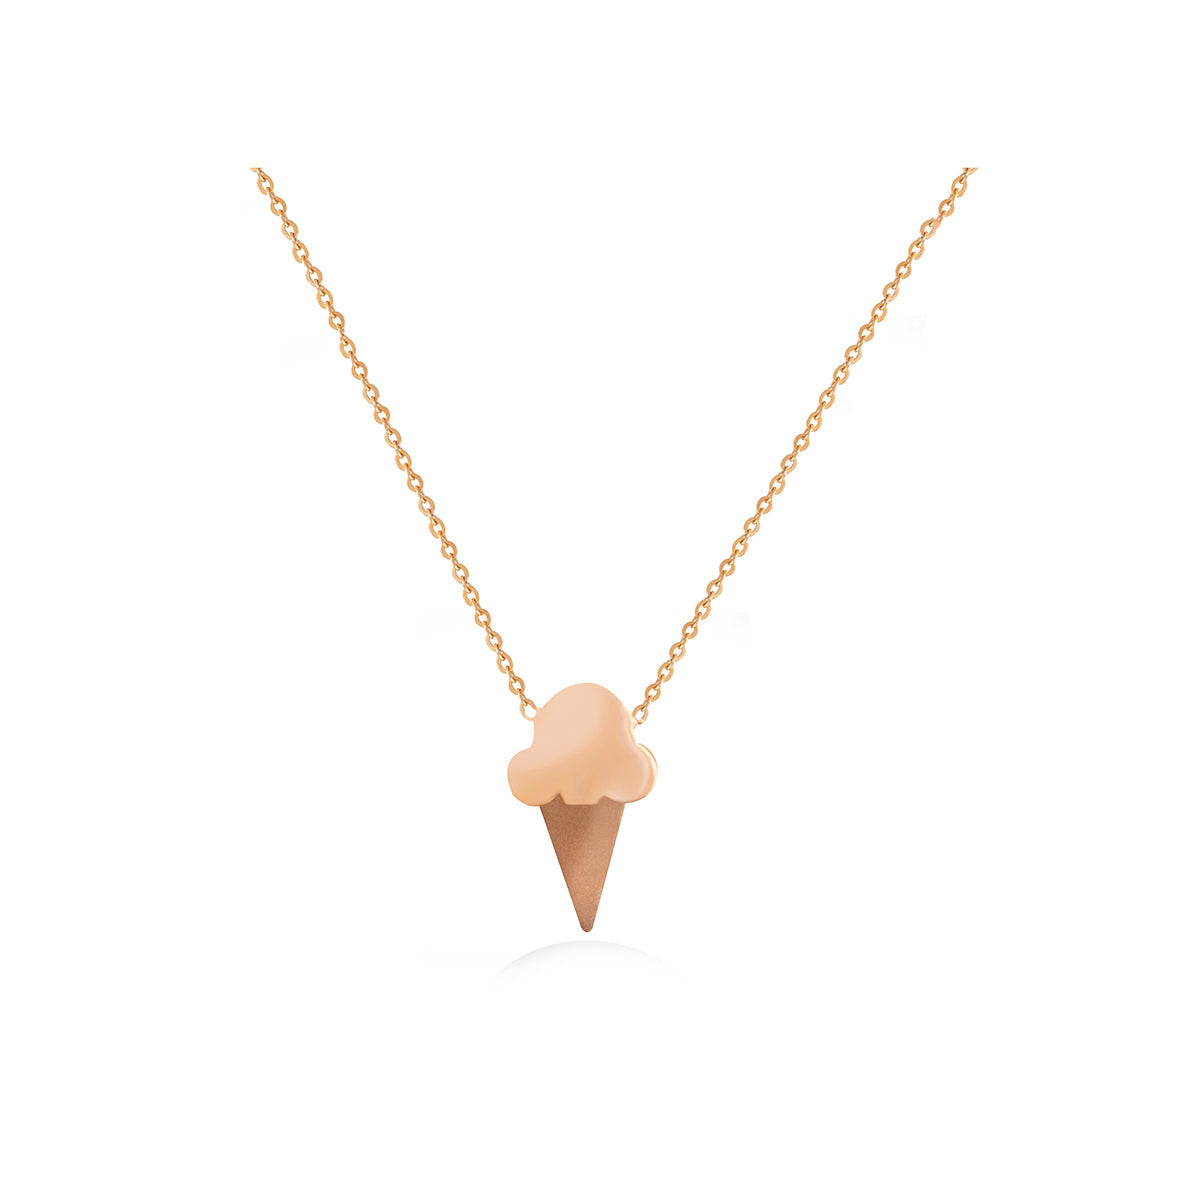 Ice Cream Charm Necklace in 18k Rose Gold